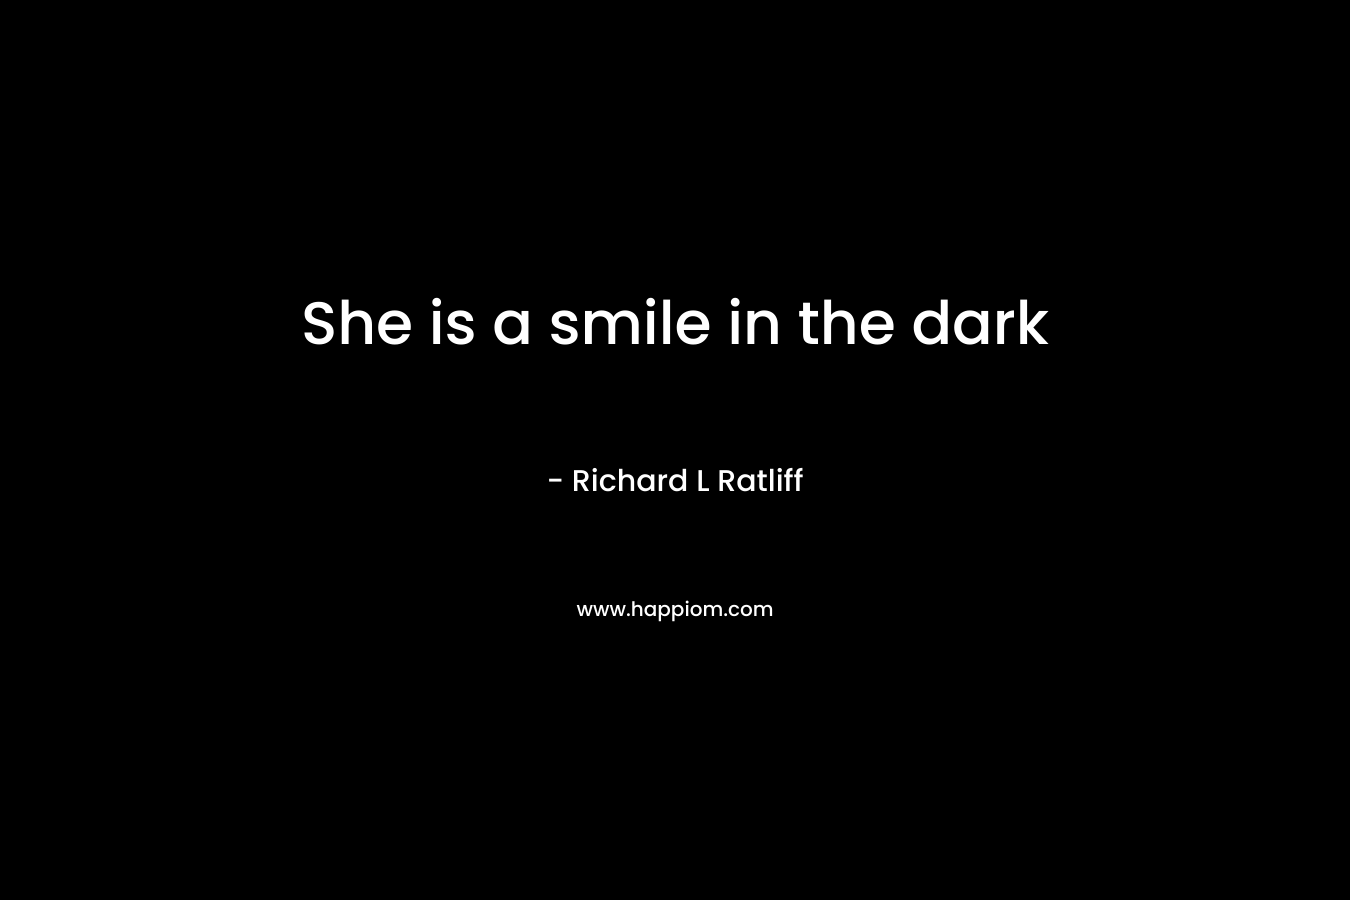 She is a smile in the dark